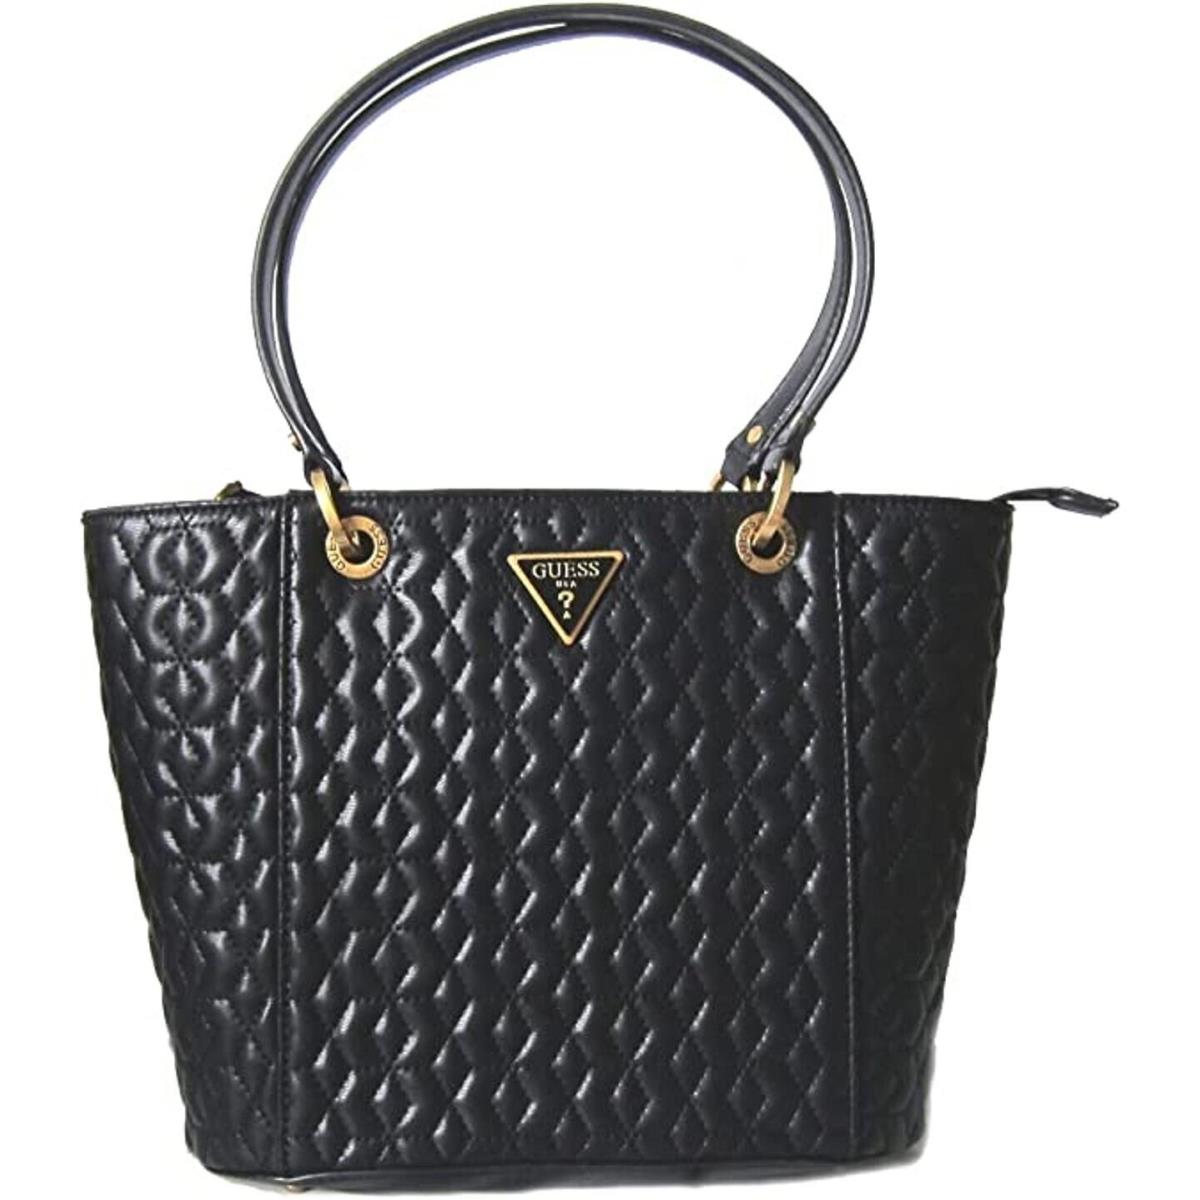 Guess Noelle Small Quilted Elite Tote Bag Black